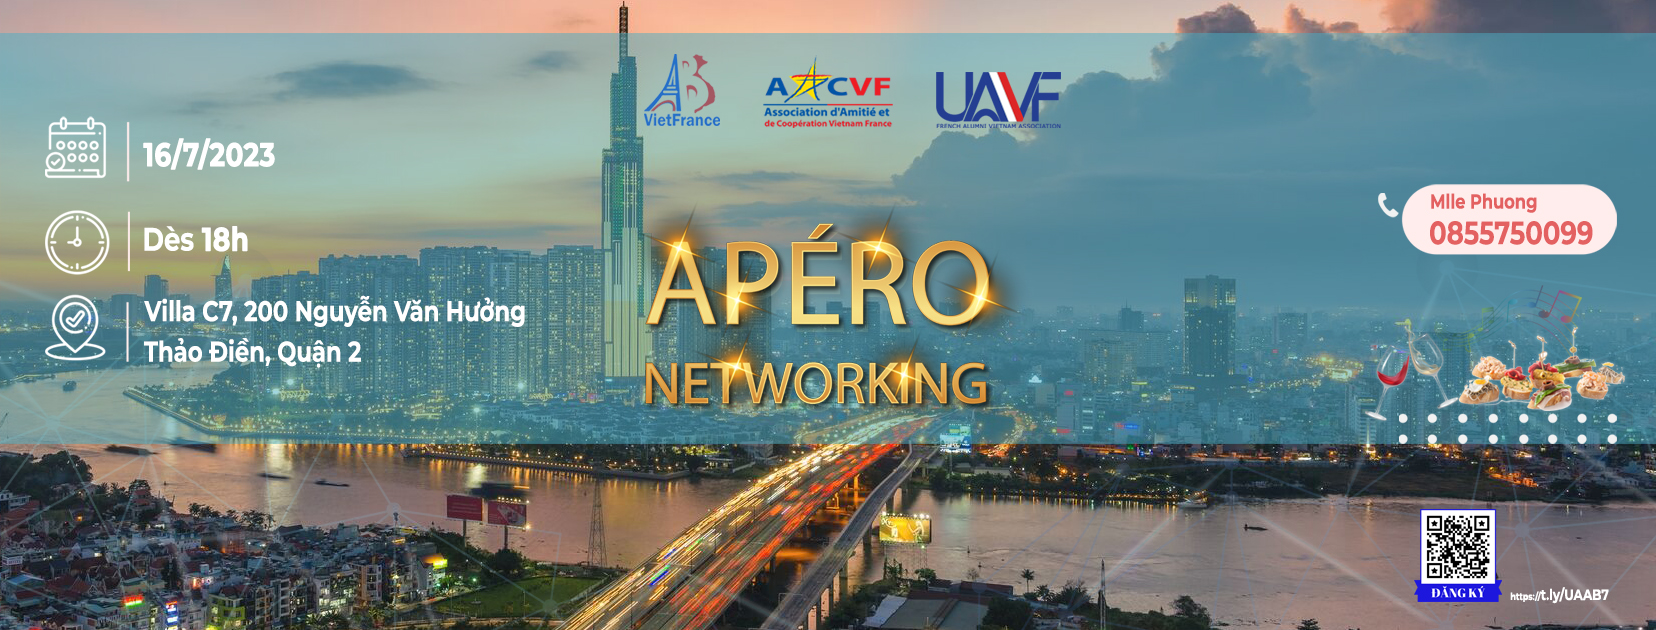 Apéro Networking – UAVF & ABVietFrance